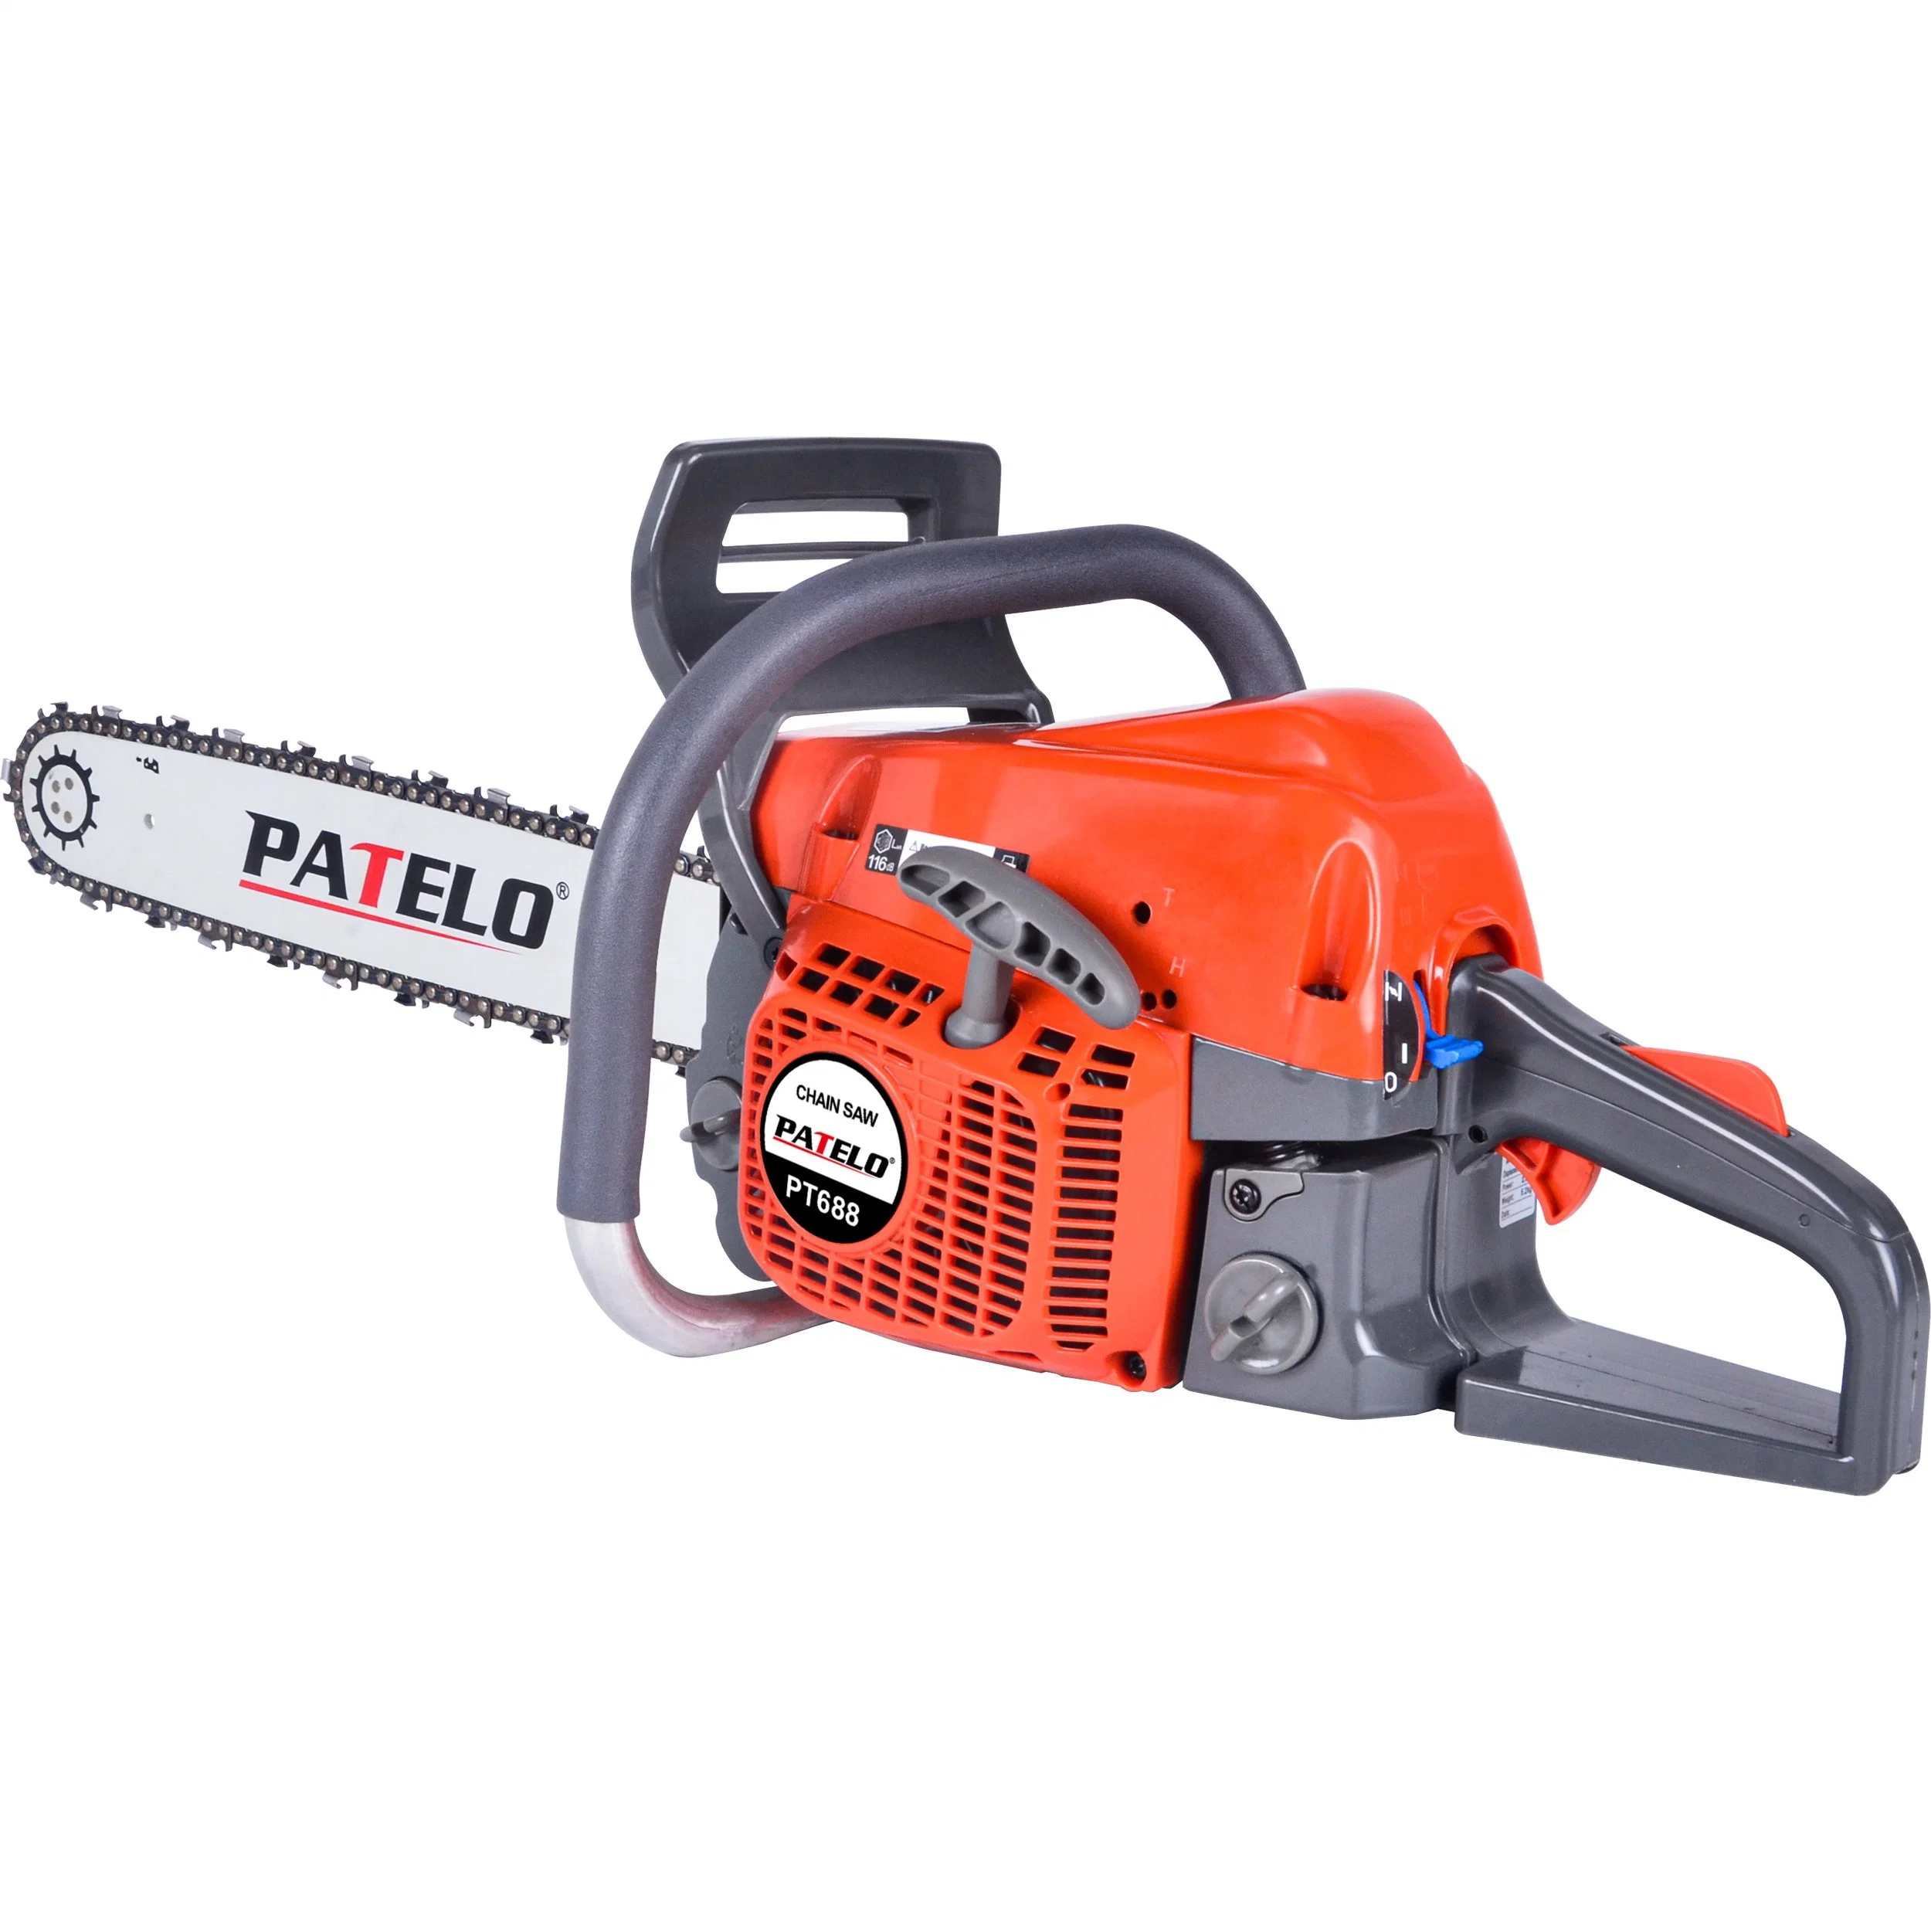 Patelo Enlarged Air Filter Gasoline Chain Saw